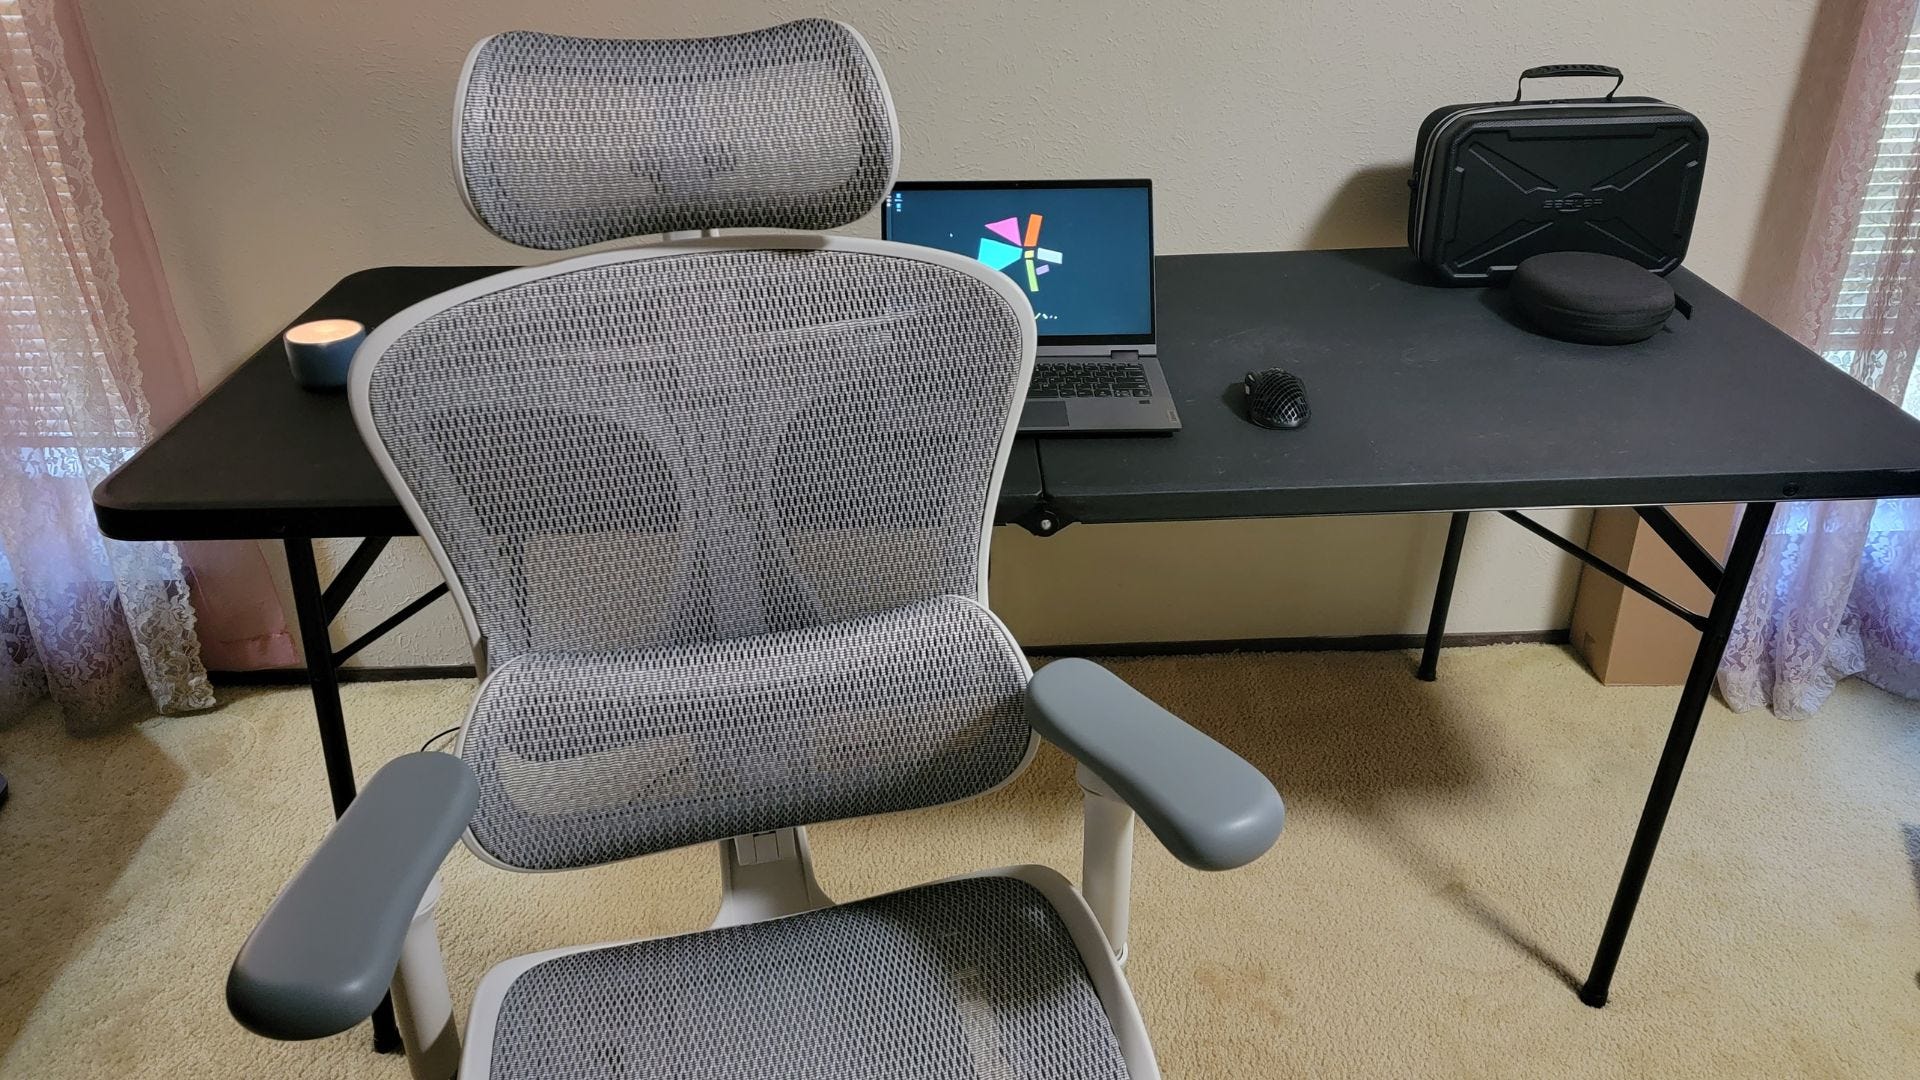 SIHOO Doro-C300 Ergonomic Chair in front of computer and desk